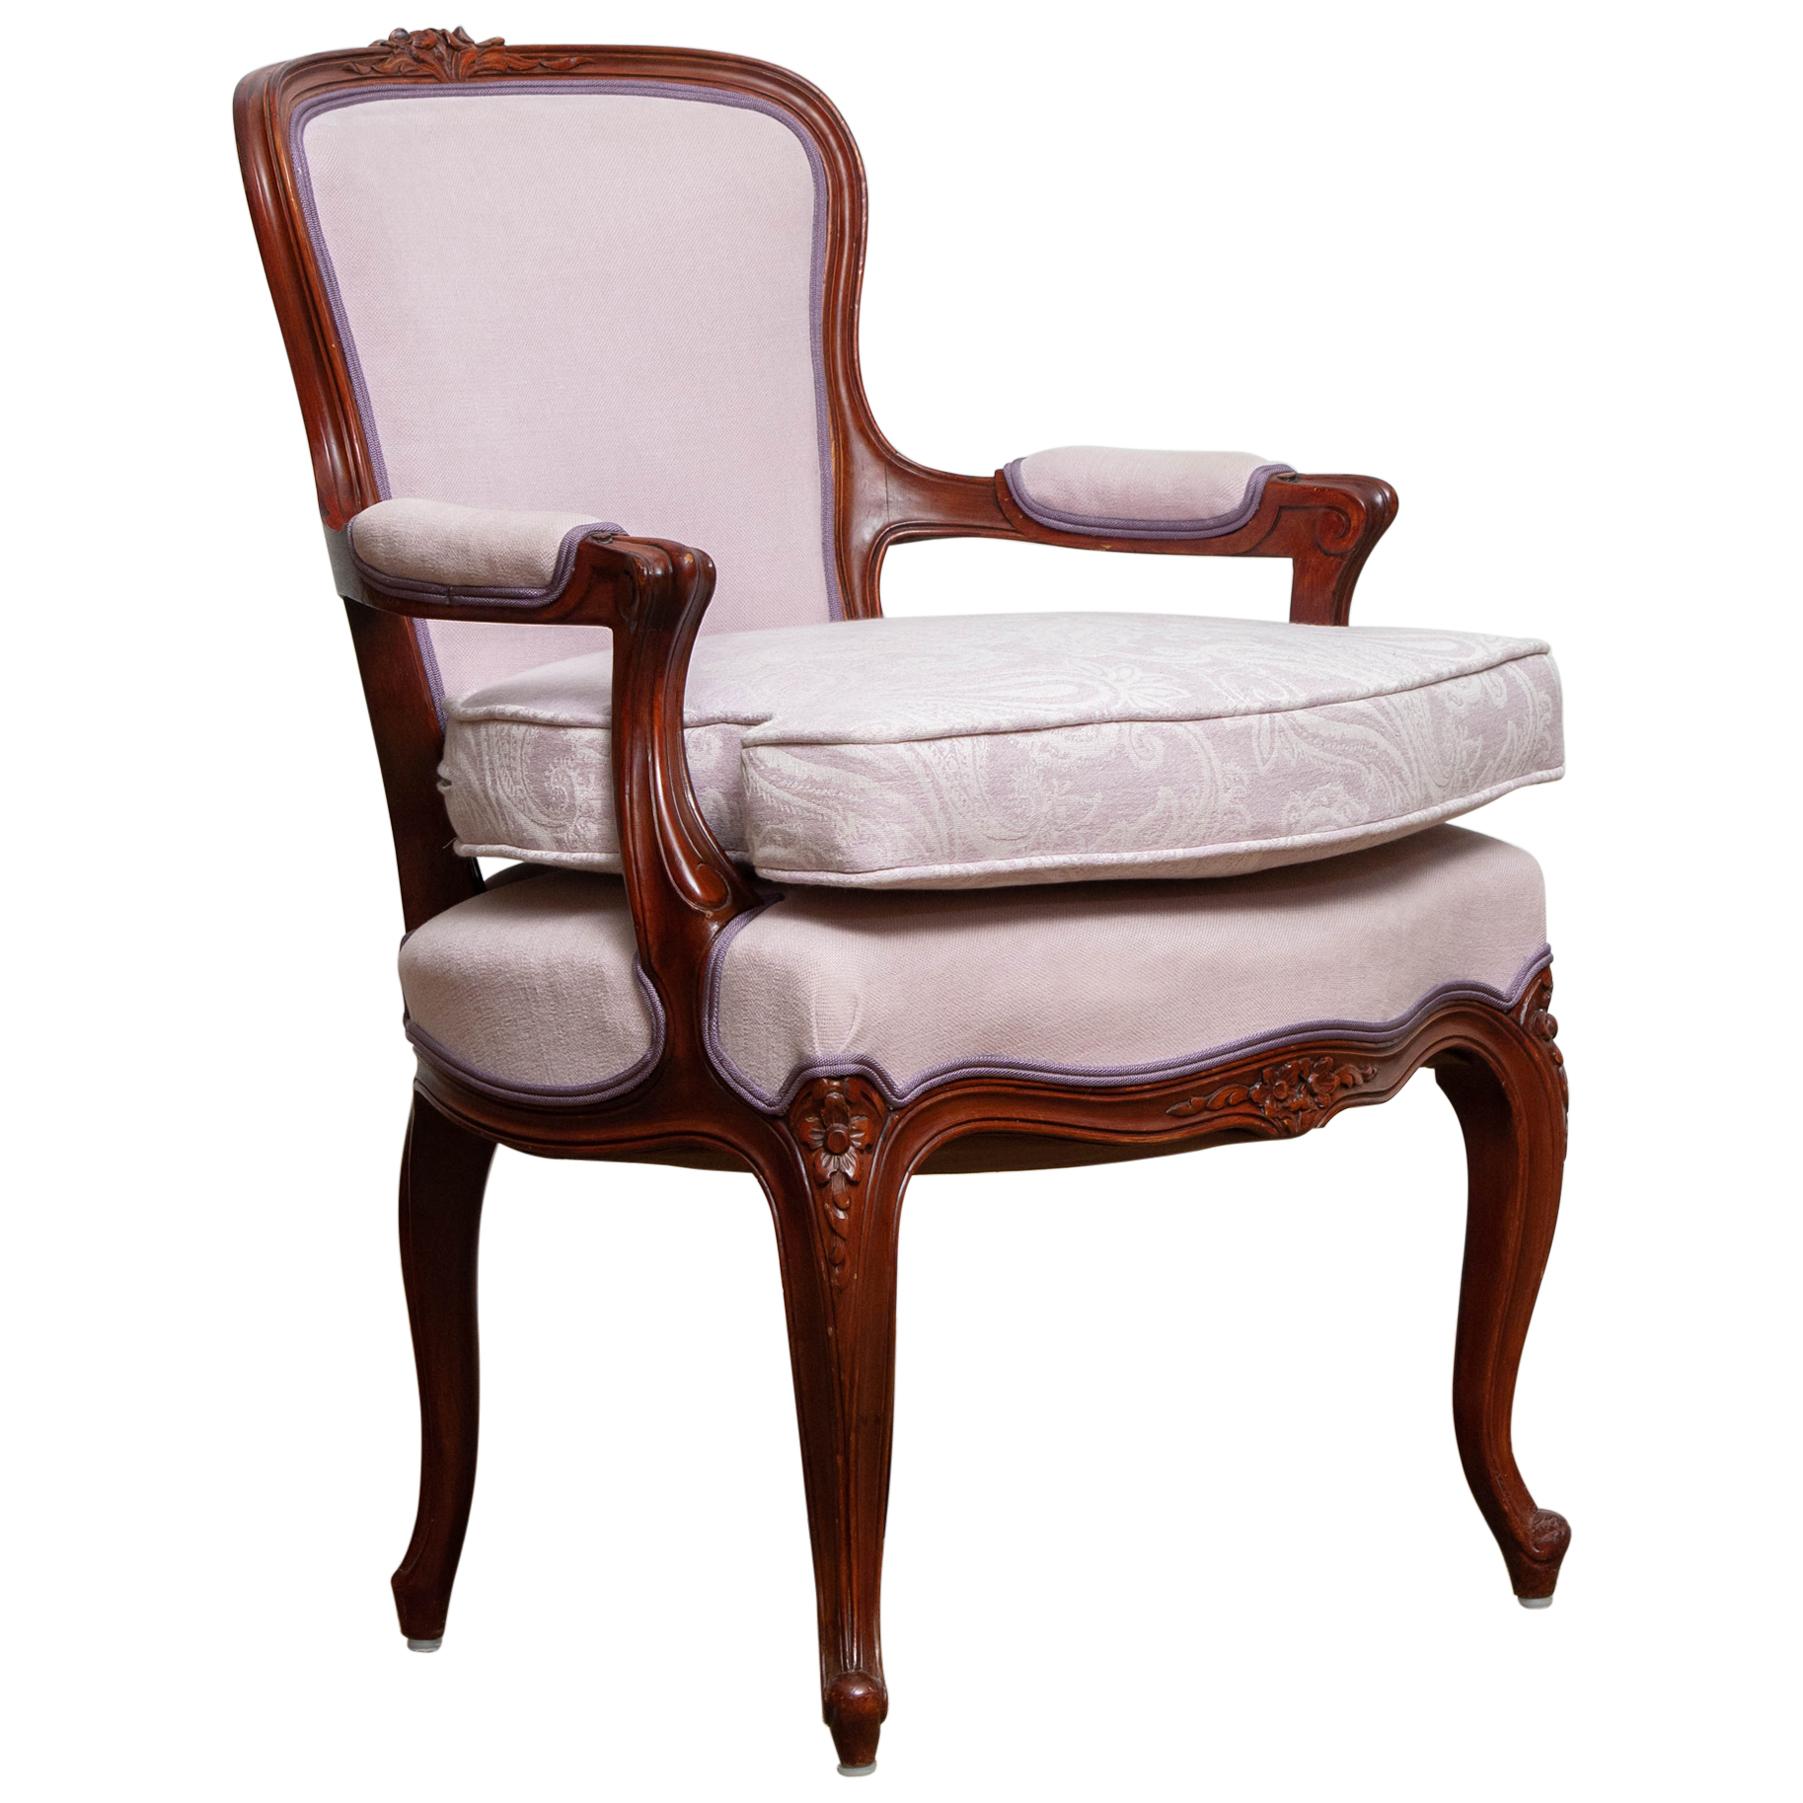 1950s, the Swedish Neo-Rococo, and finished in the shabby chic technique armchair is in perfect condition. Upholstered in pink fabric and an extra cushion for extra comfort also in pink jacquard. Measures: Seat height with the extra cushion is 21.20